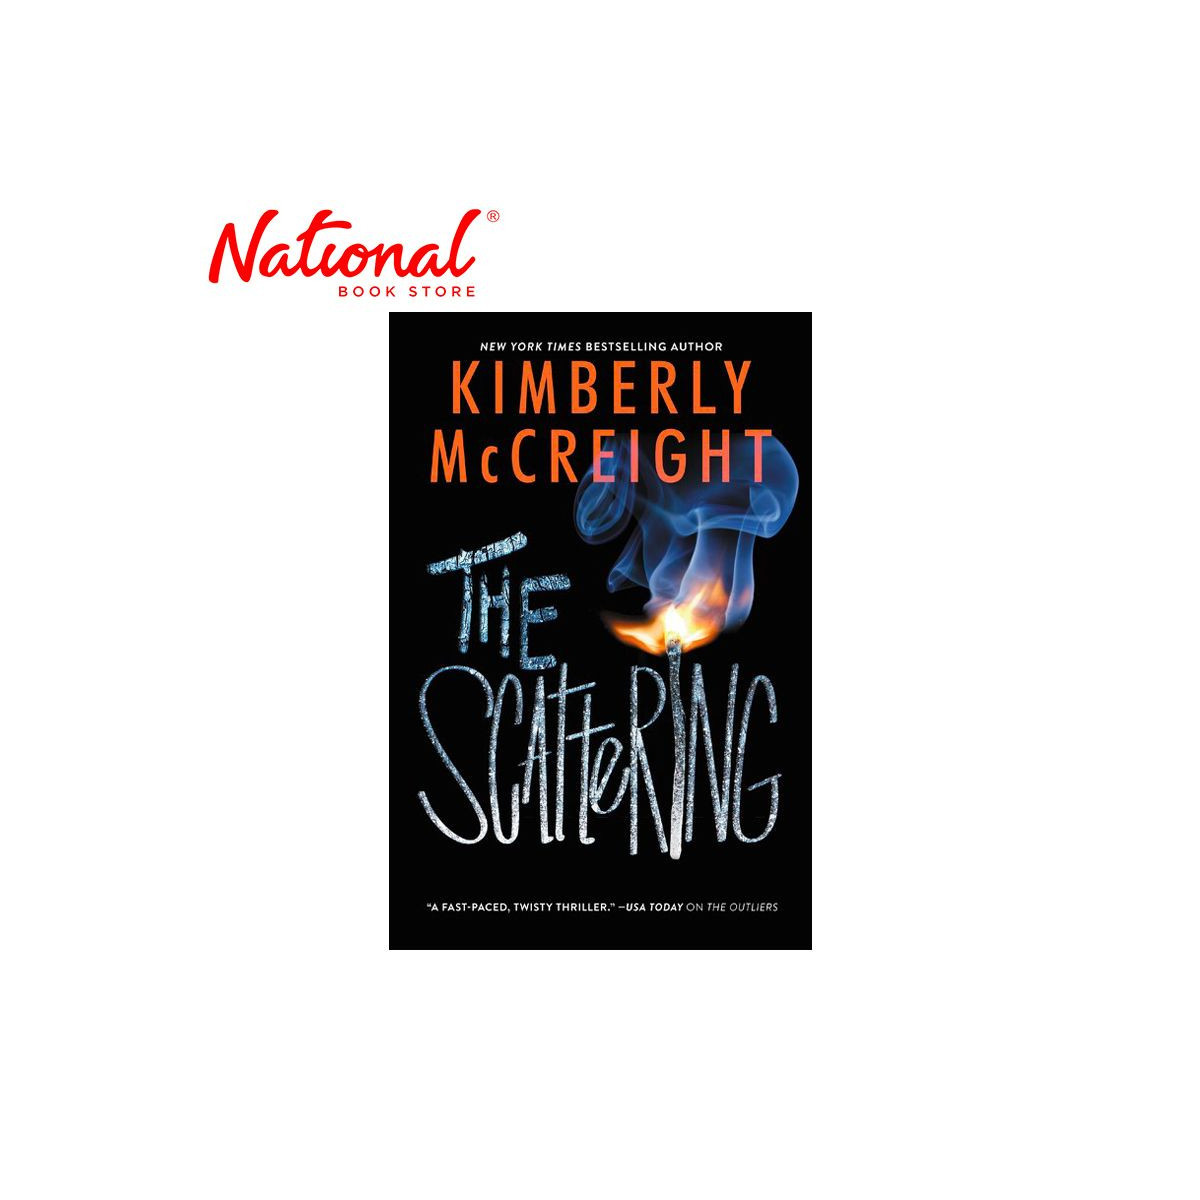 The Scattering Trade Paperback by Kimberly McCreight - Teens Fiction - Thriller - Mystery - Suspense